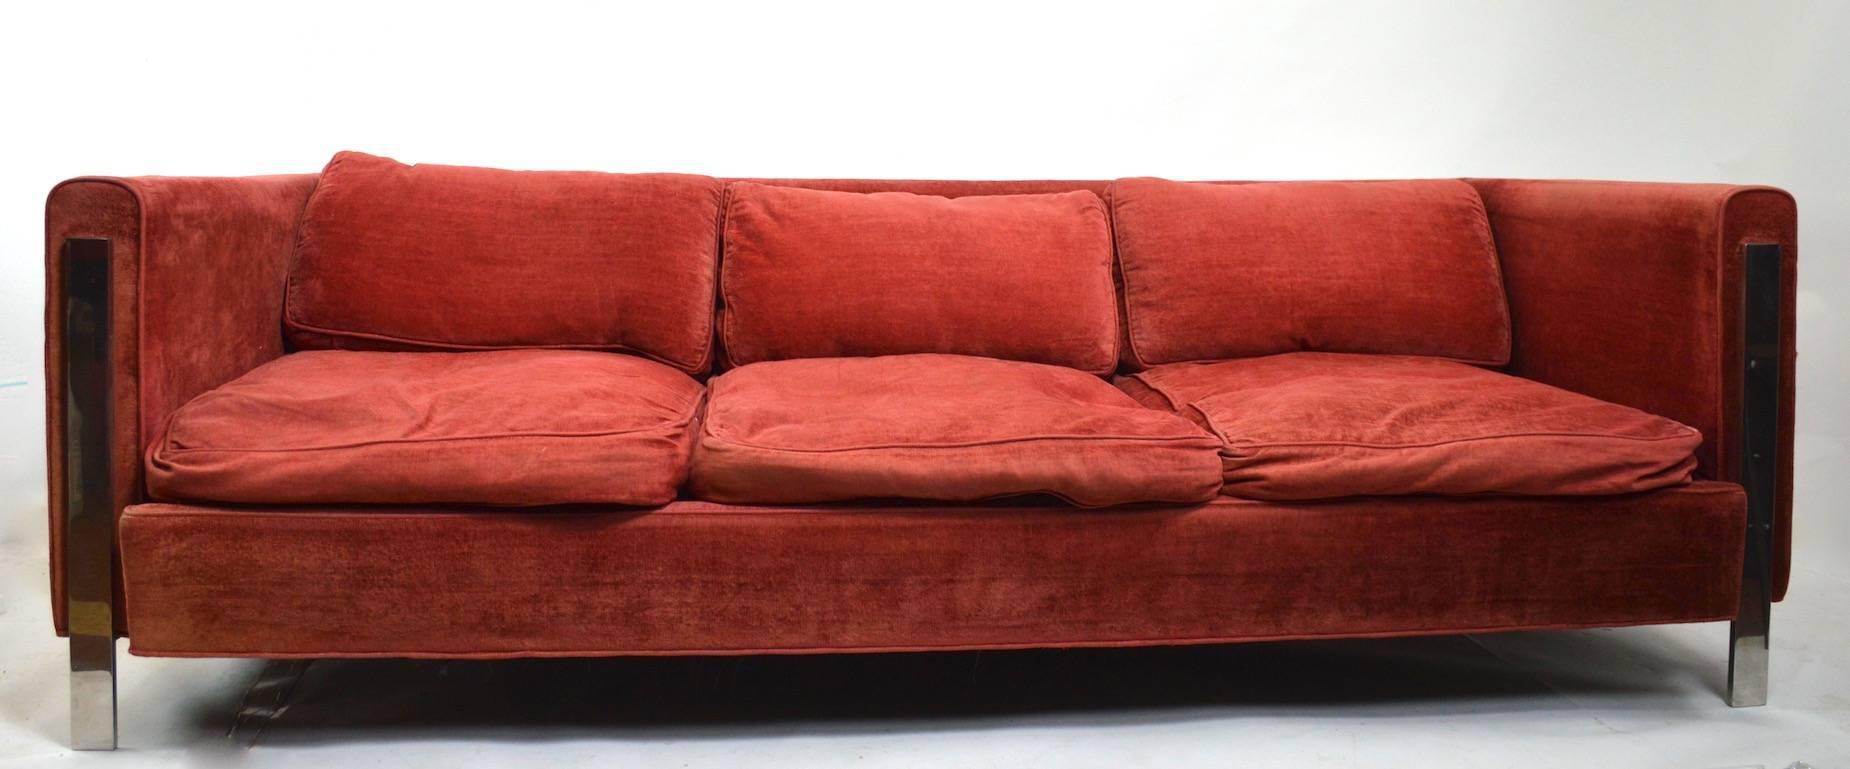 Even arm box sofa in original velvet blend upholstery (fabric shows wear), down cushions and bright chrome legs. Classic 1970s form attributed to Milo Baughman. Usable as is if you like the broken in look, or reupholster to your requirements if you